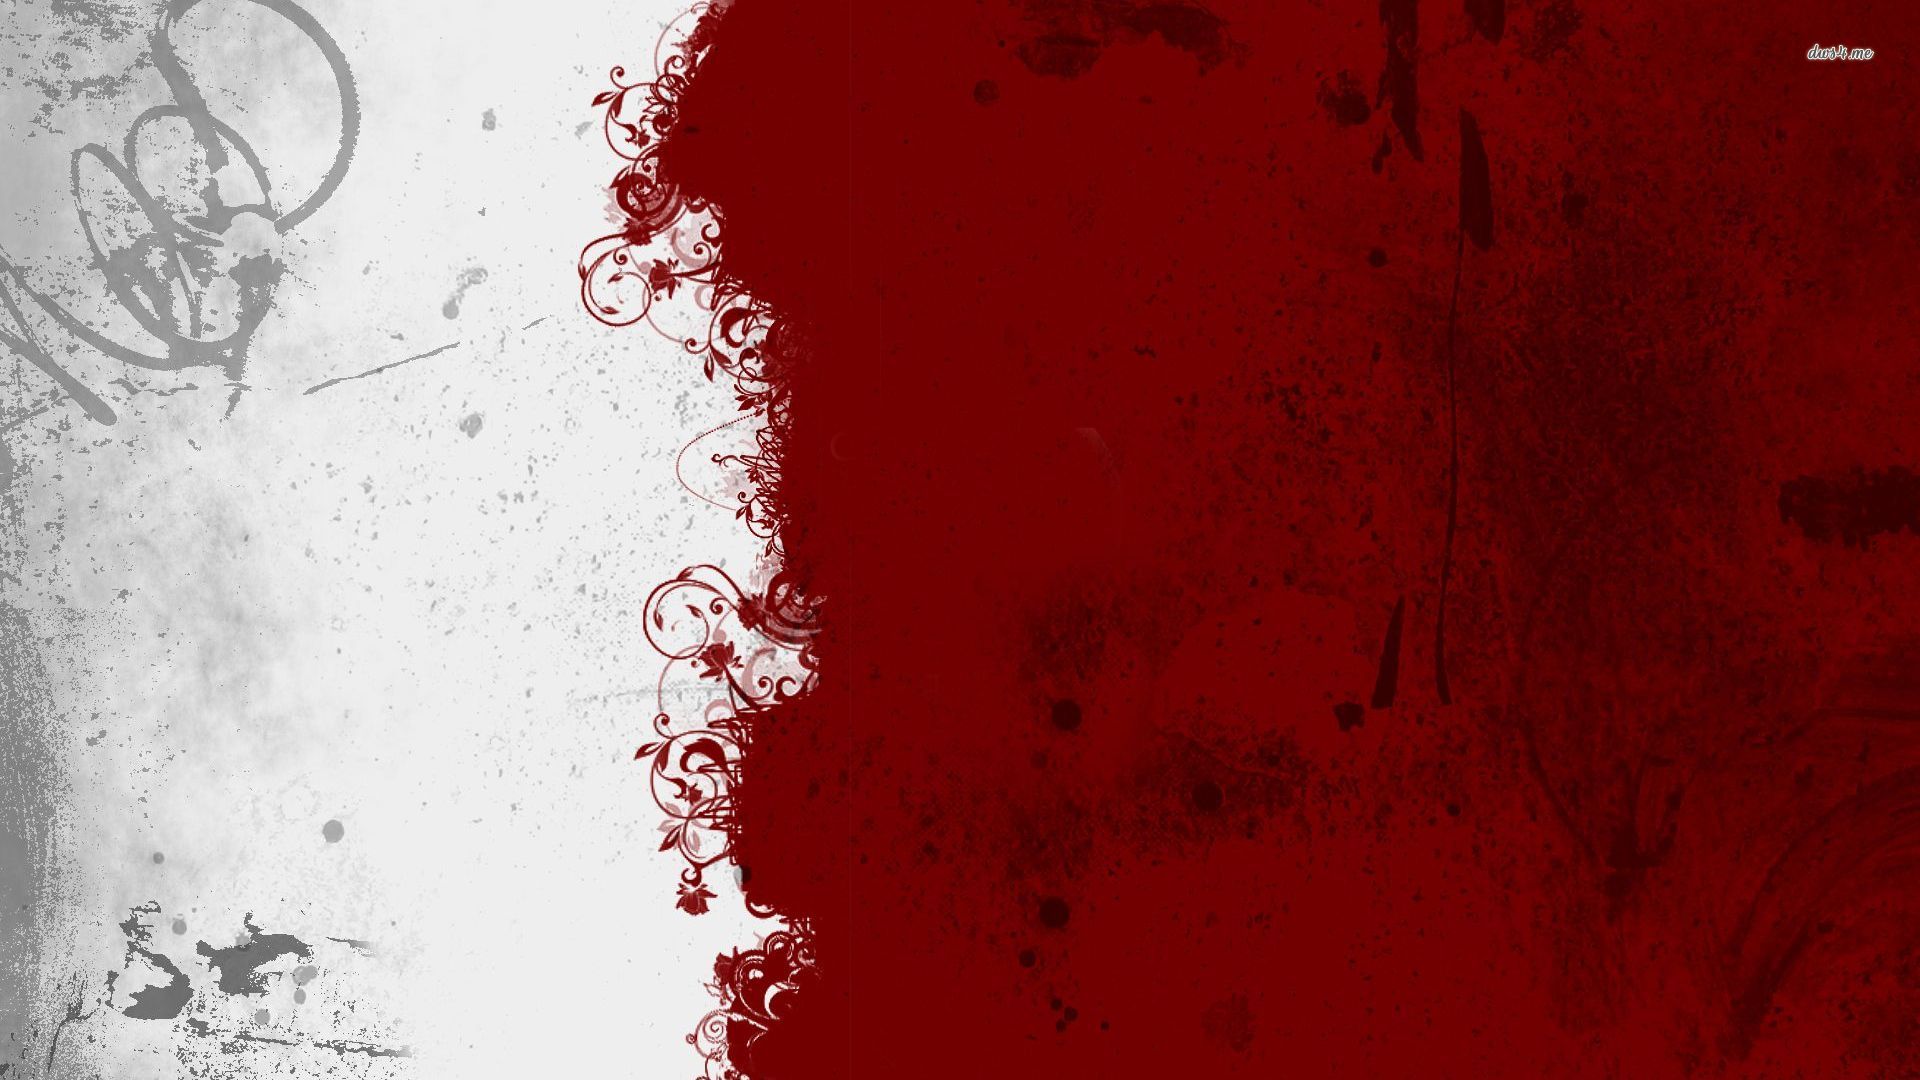 Red And White Abstract Wallpaper Jpg